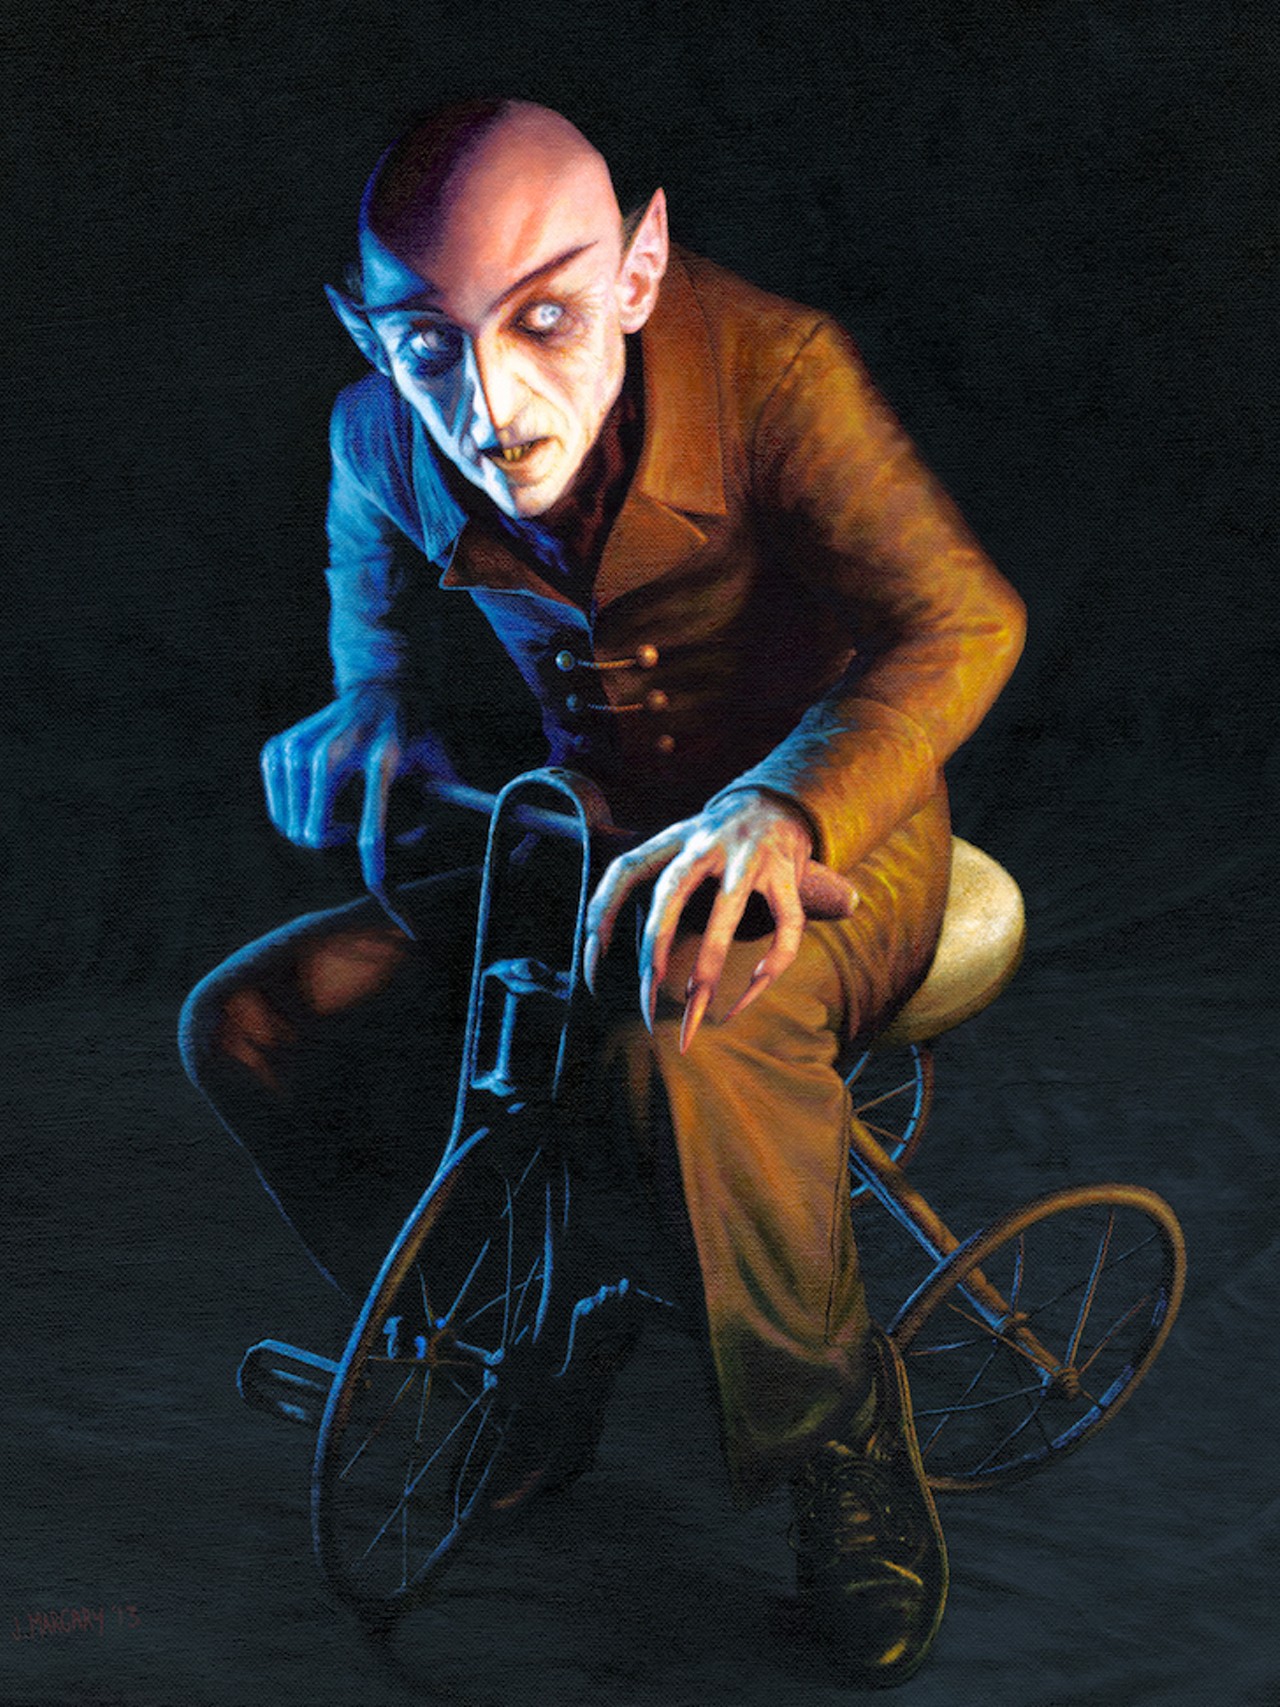 &#148;Nosferatu on a Tricycle&#148; 
(18&#148; x 24&#148;) by Jaime Margary, $6,000